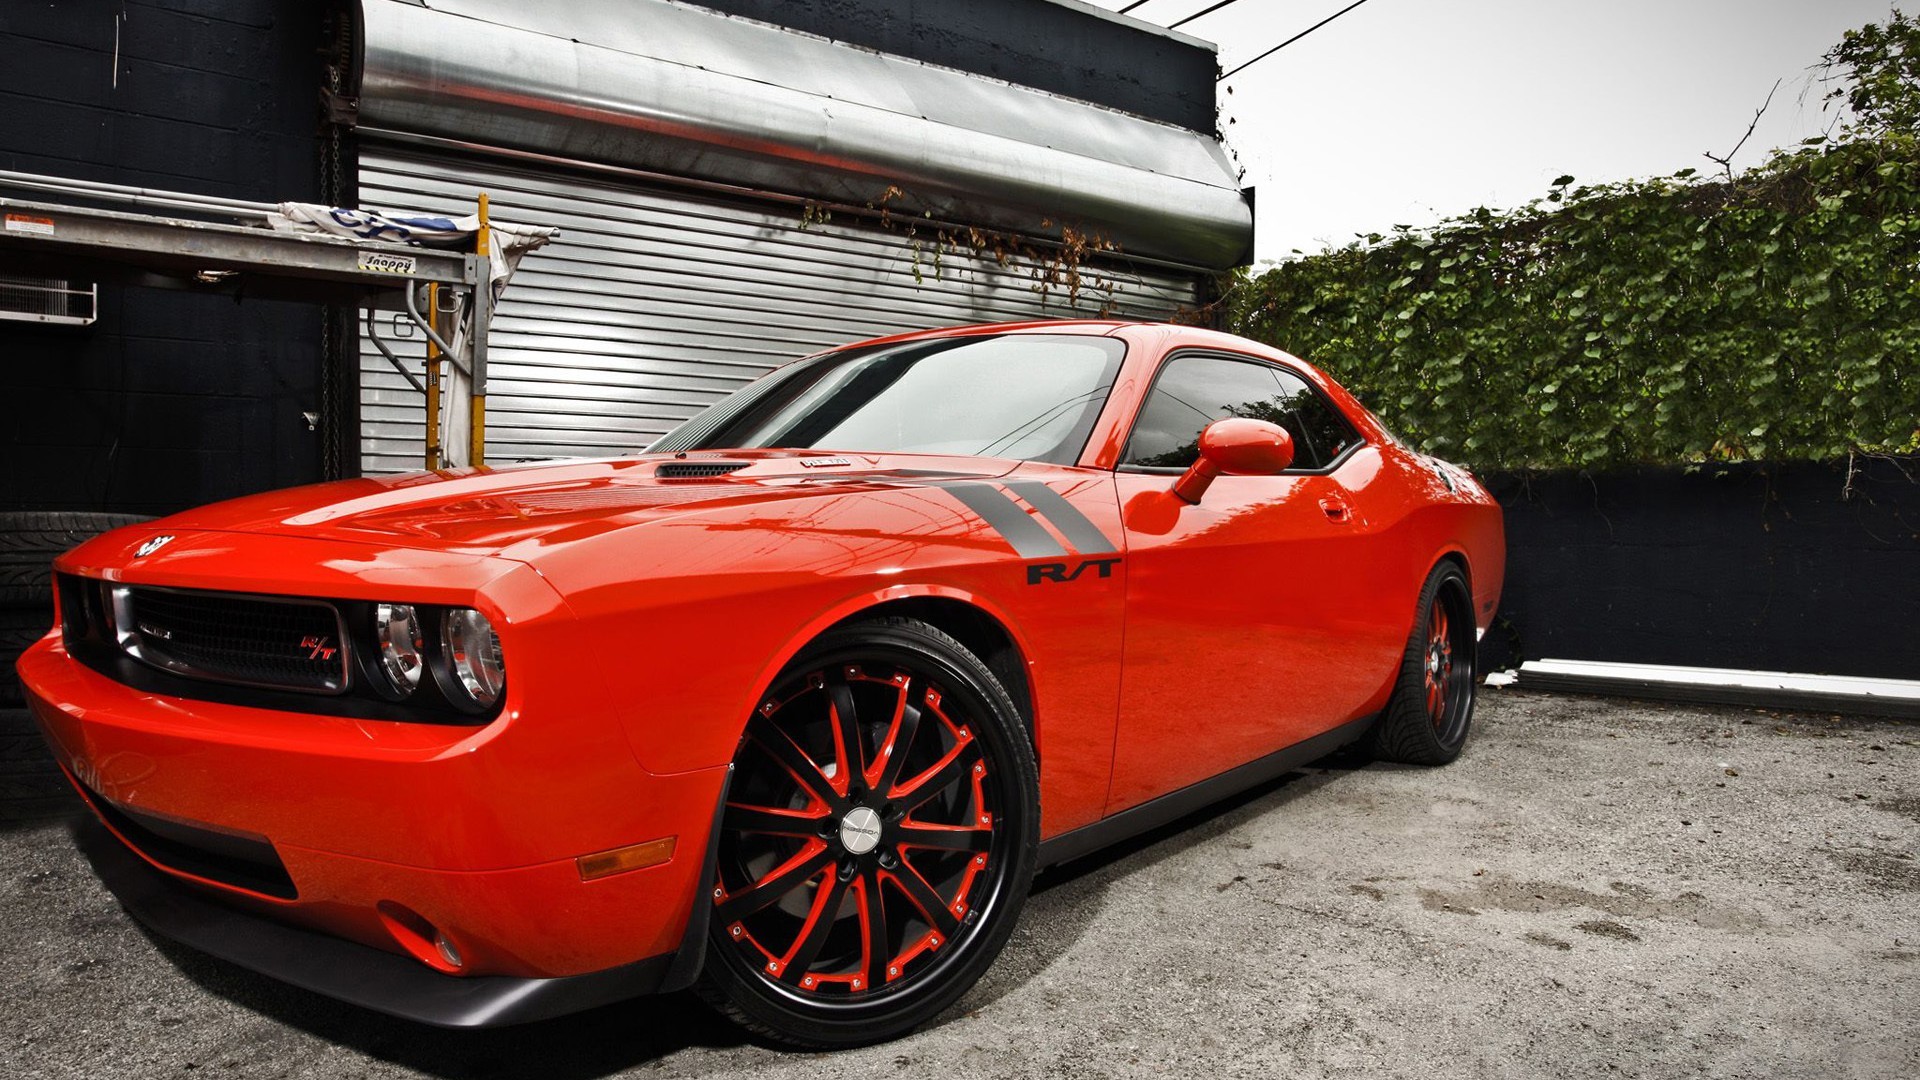 General 1920x1080 Dodge Challenger Dodge muscle cars red cars car vehicle American cars Stellantis